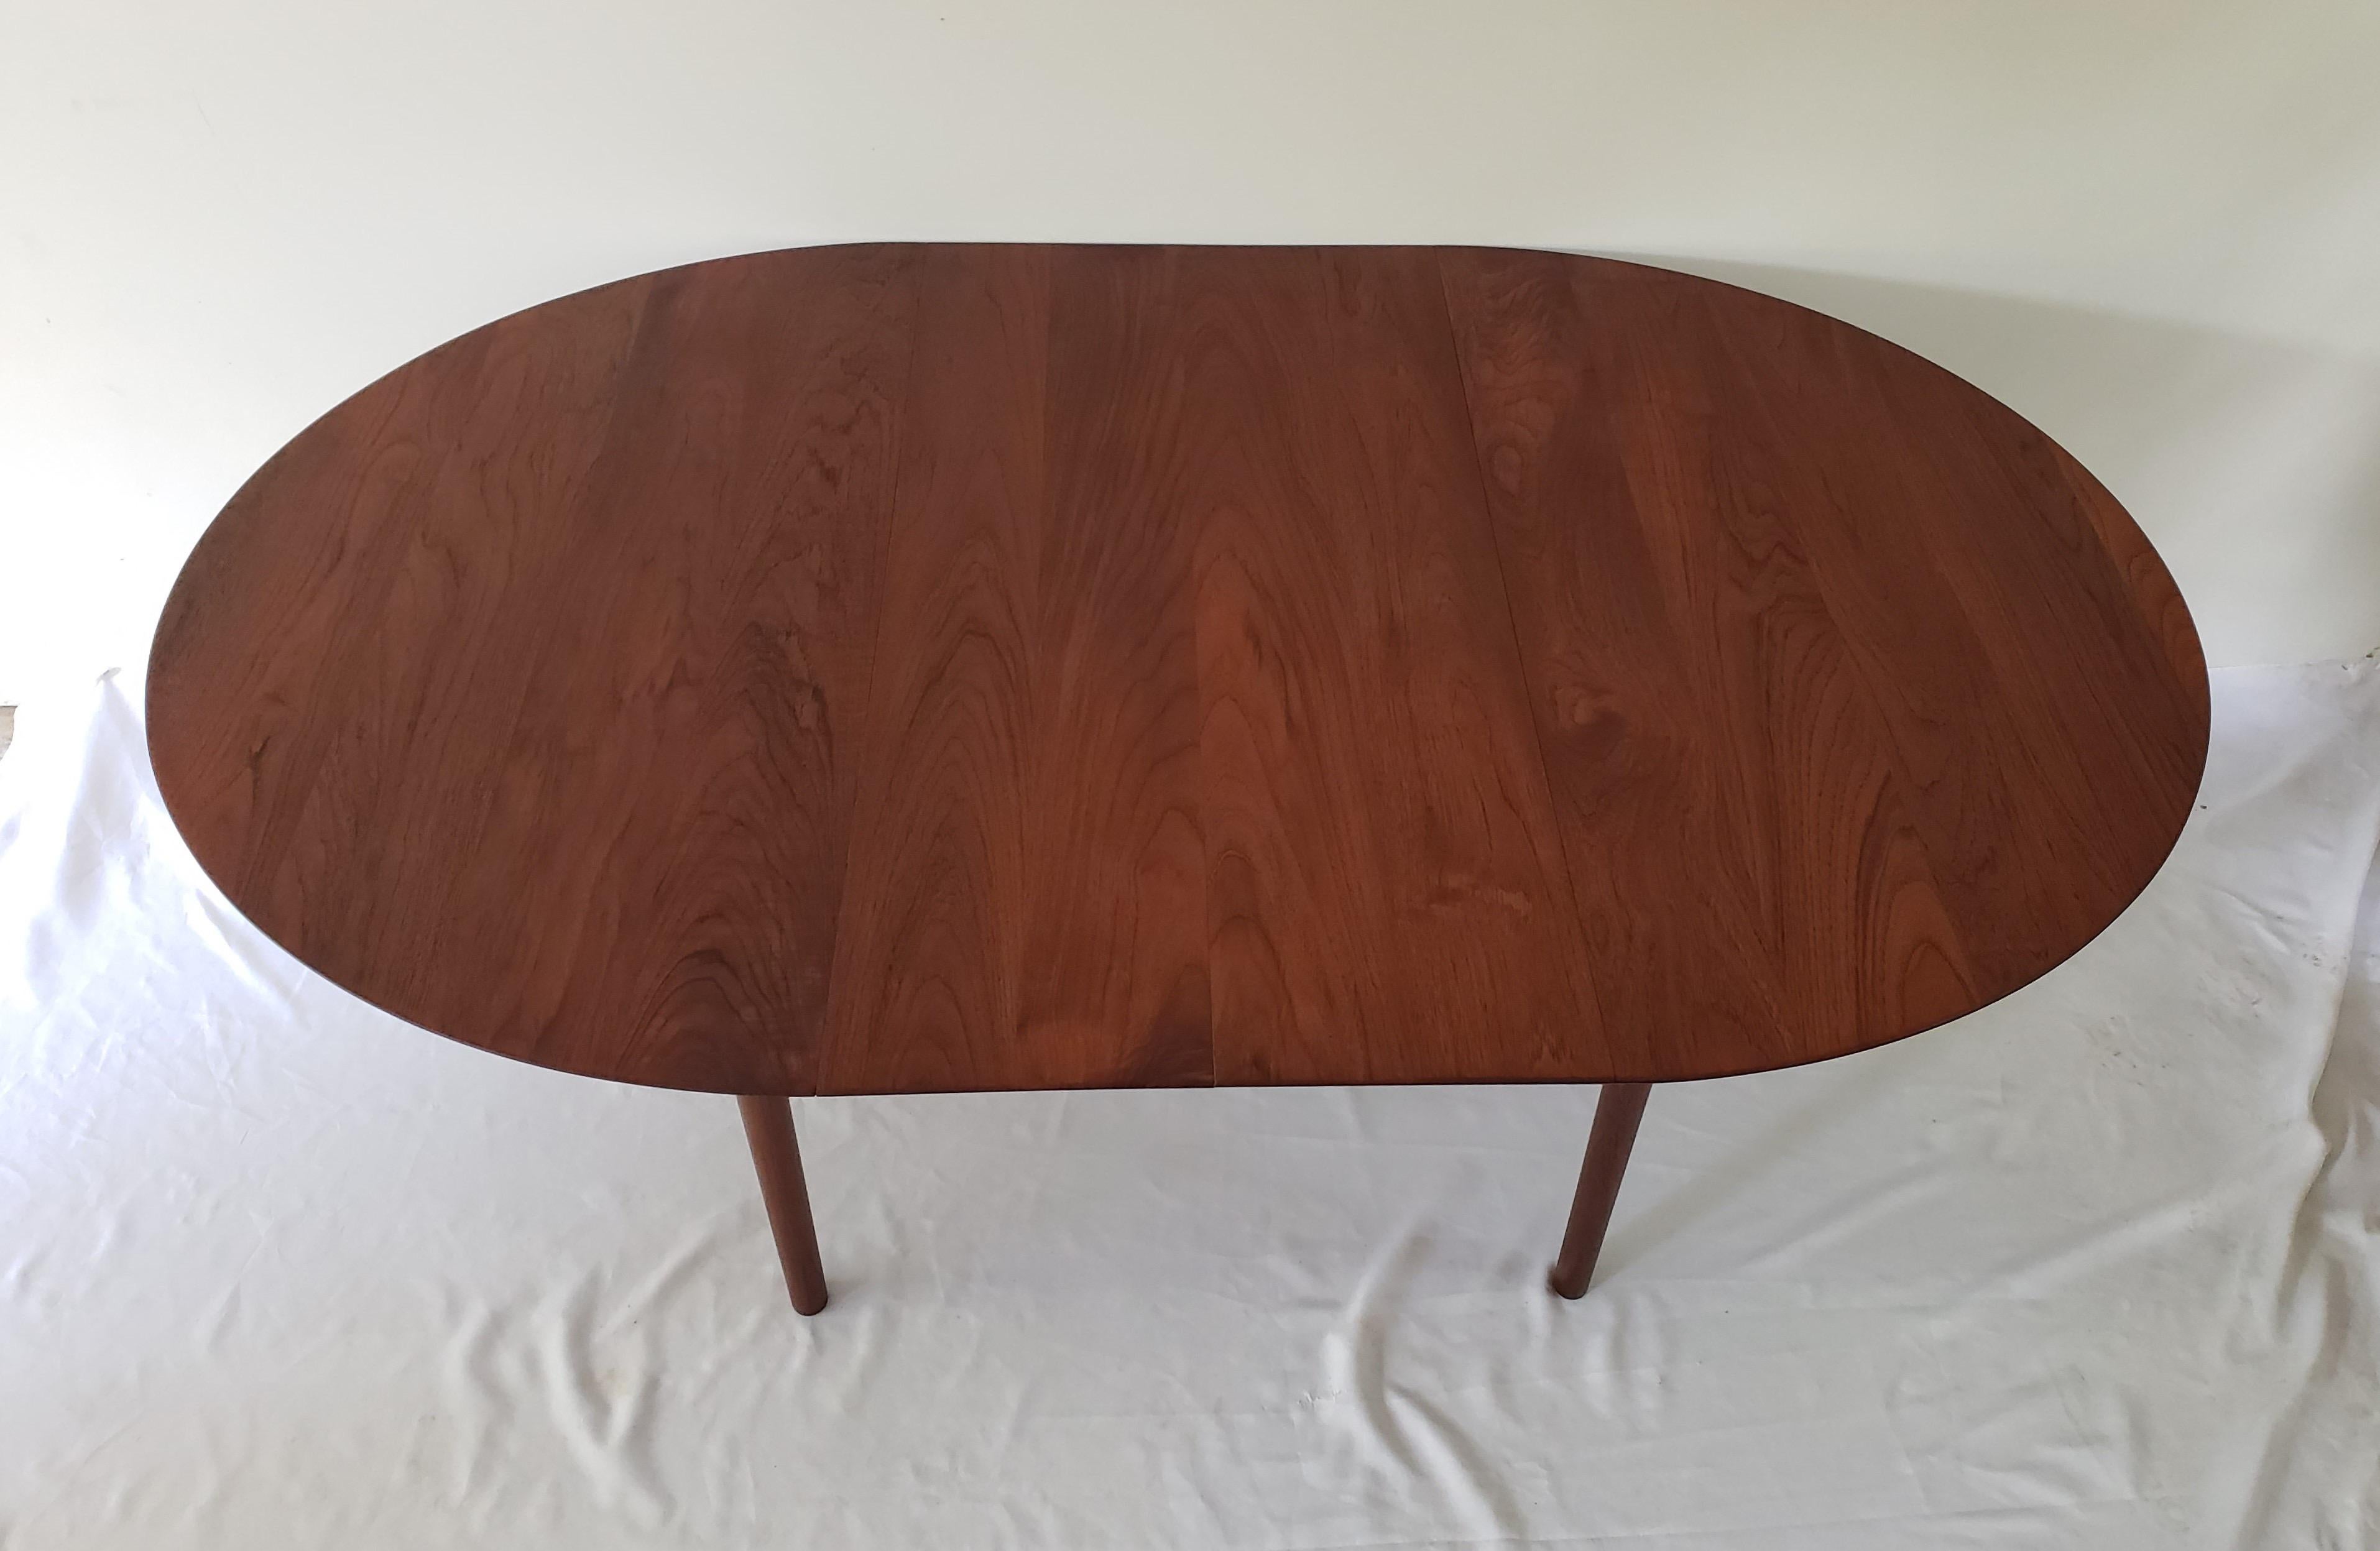 Peter Hvidt & Orla Mølgaard Nielsen model “311” Danish teak extendable dining table. Produced in Denmark by Søborg Møbler during the 1950s. Slightly oval solid teak tabletop with tapered conical teak legs. A great size for a smaller dining room or